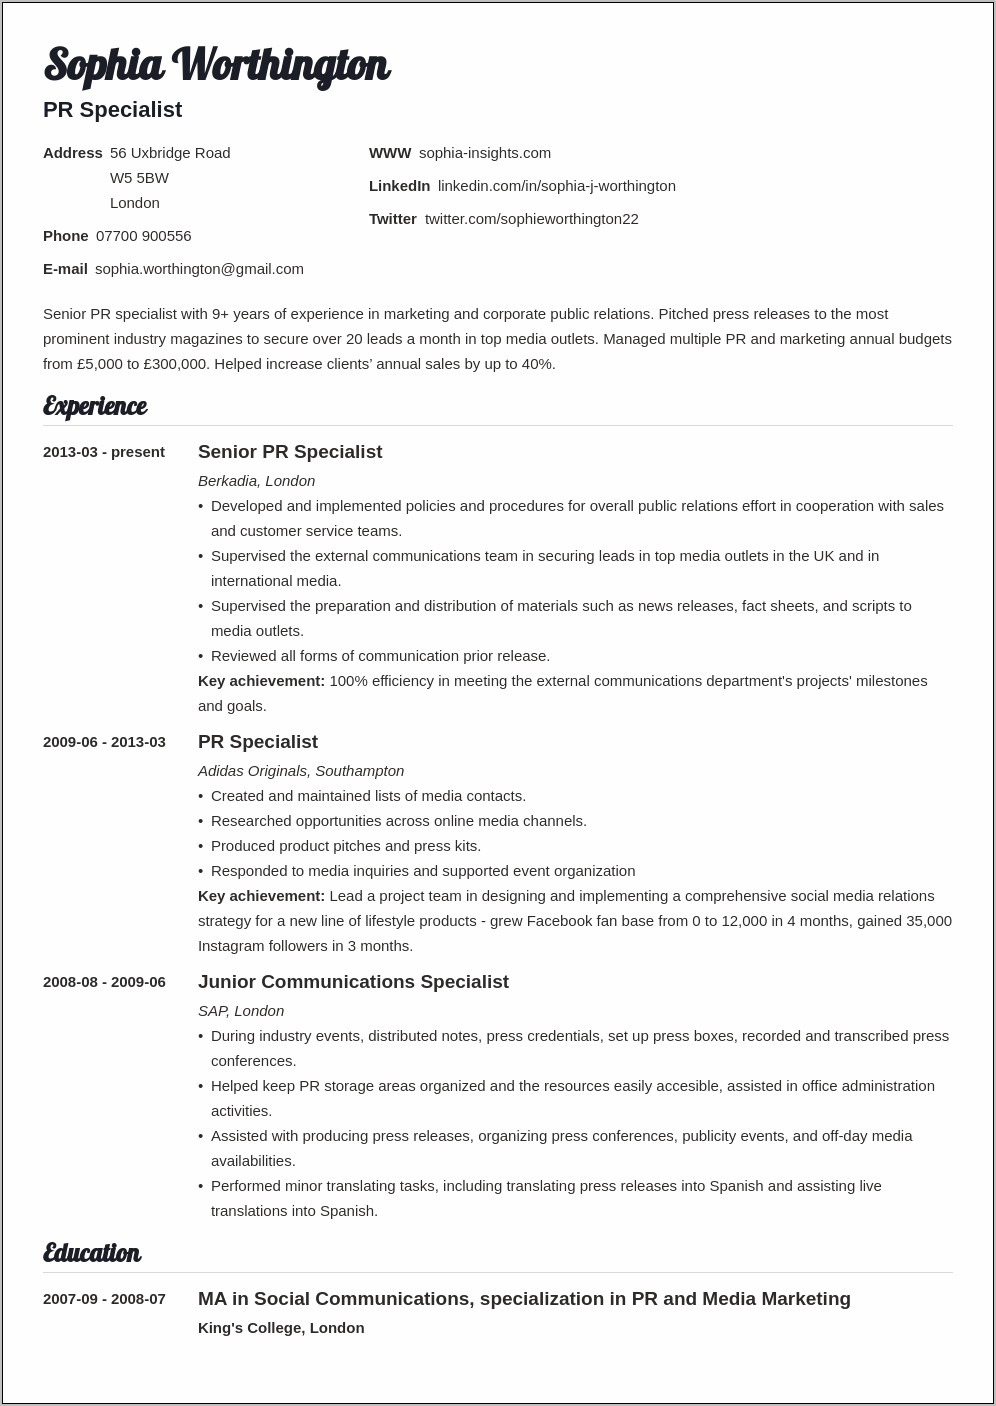 Resume Example With A Profile Section